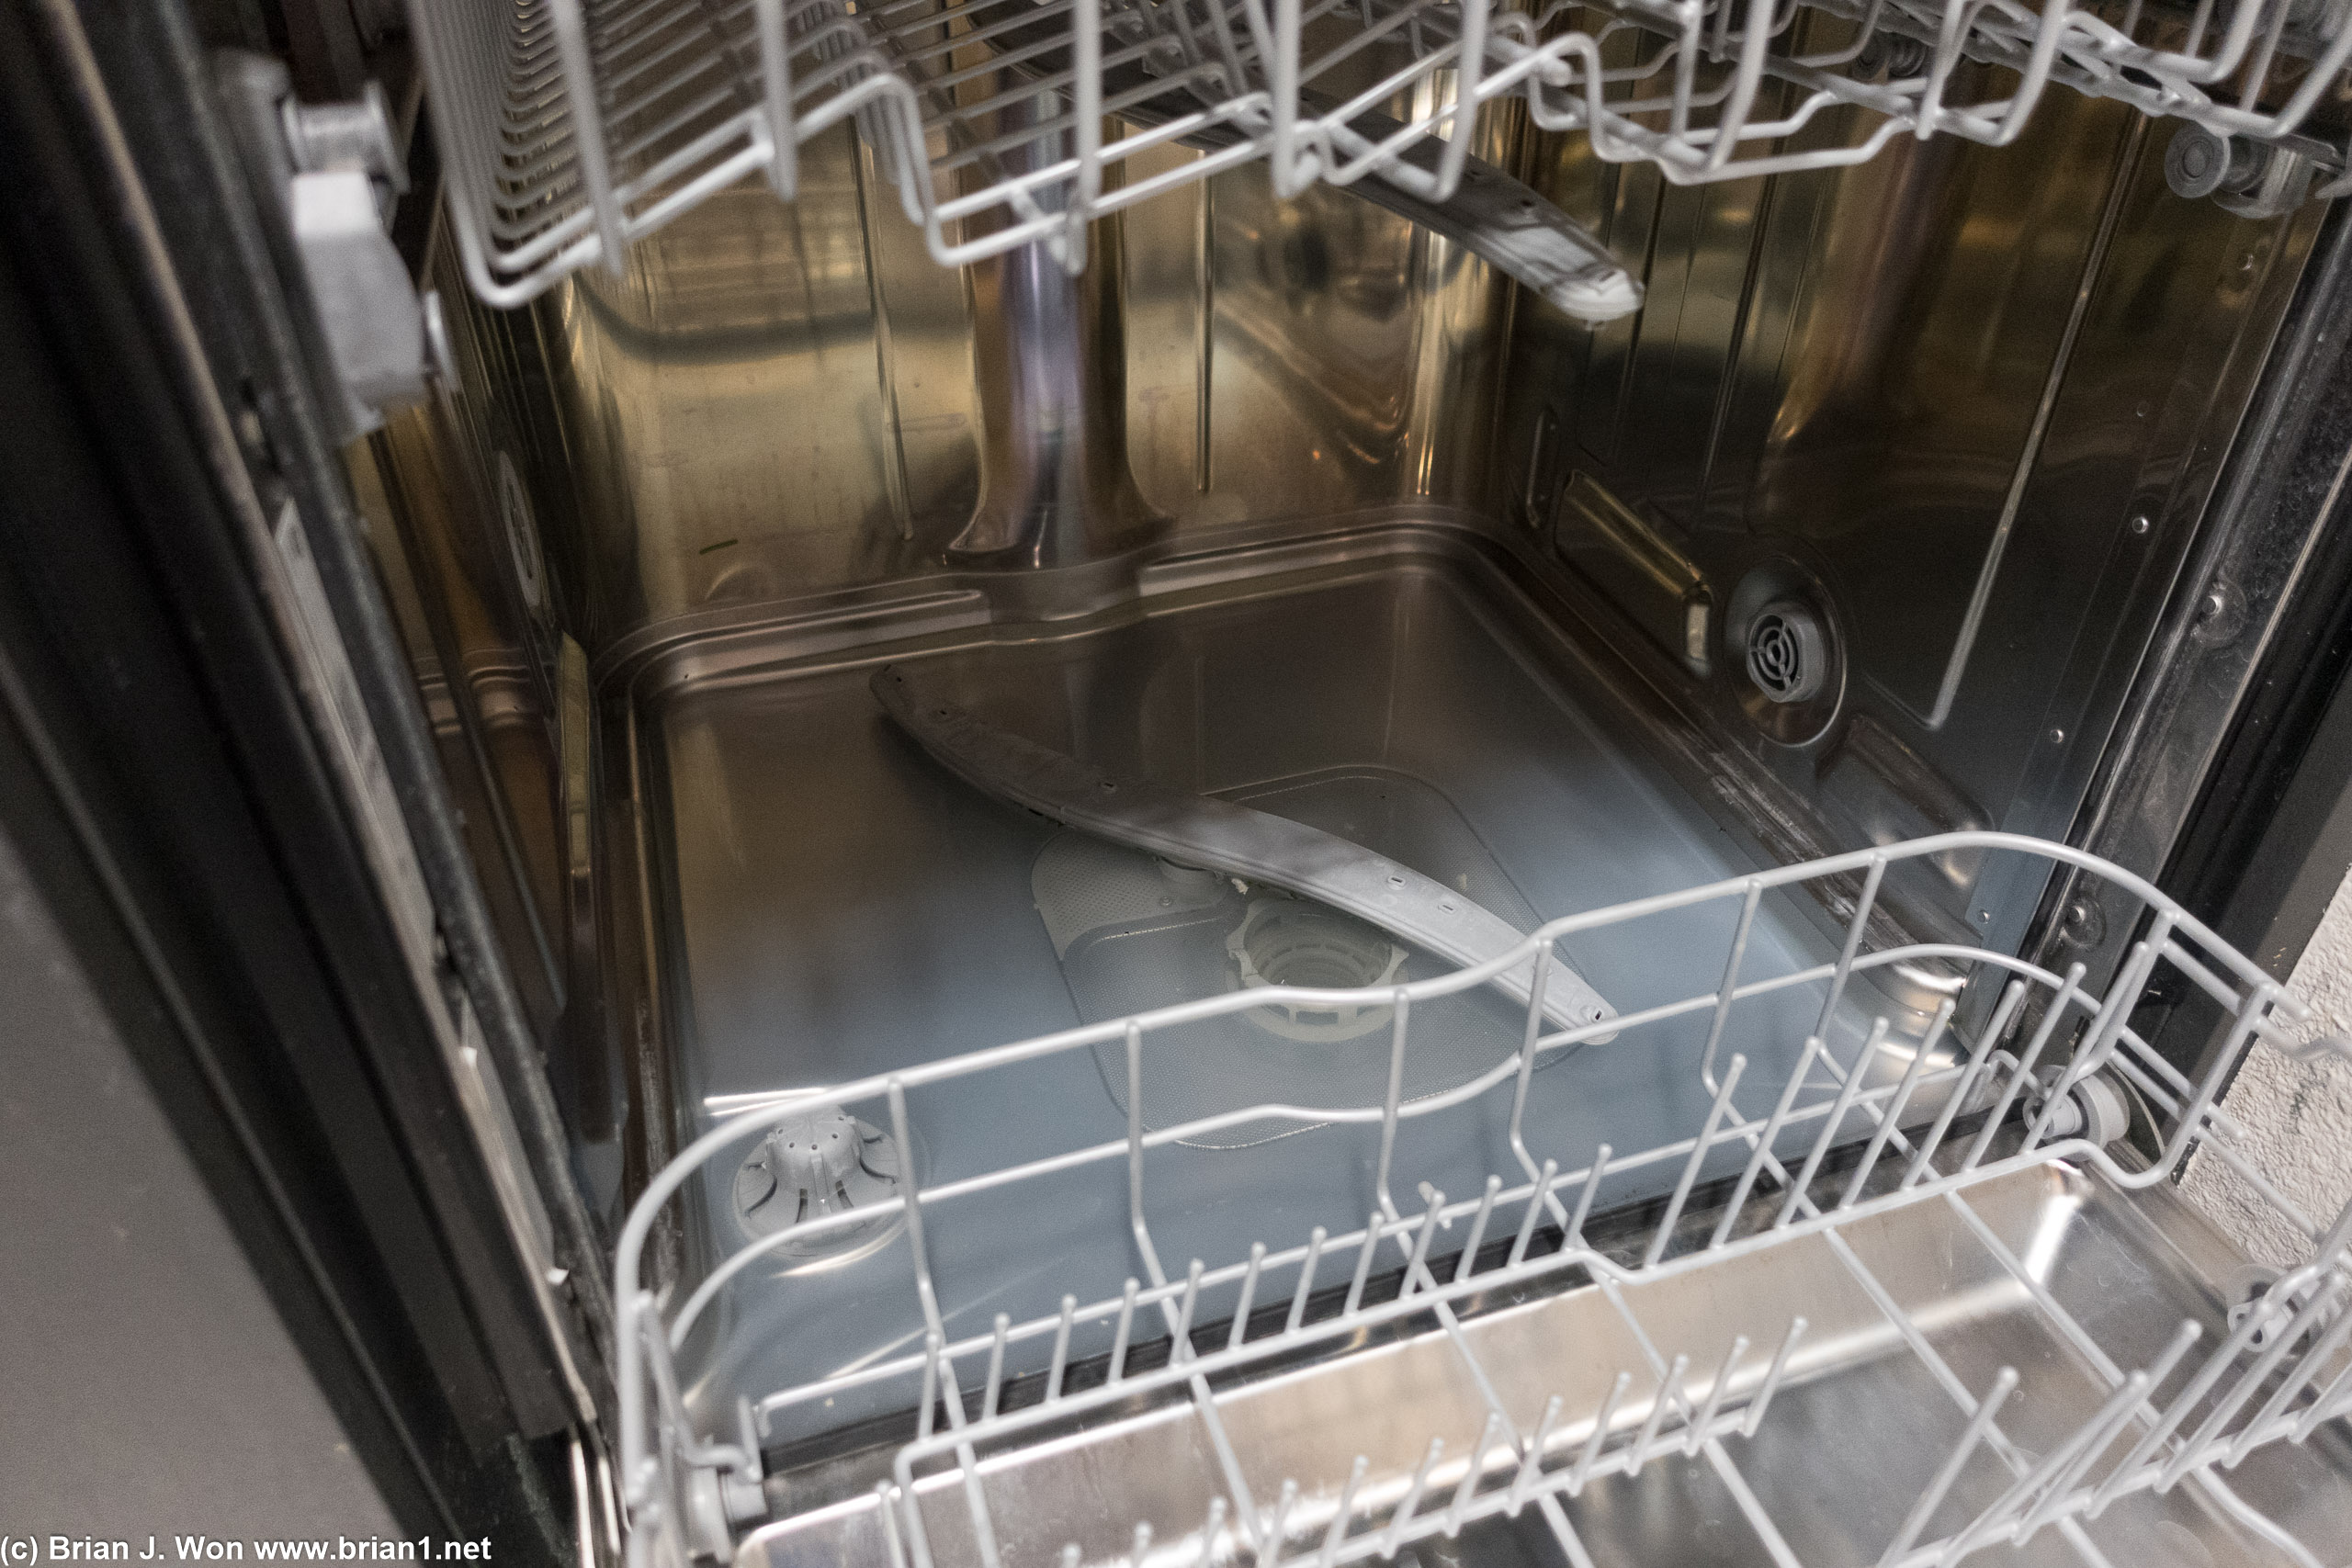 Thanks for the broken dishwasher, previous guests at the Westin Monache.